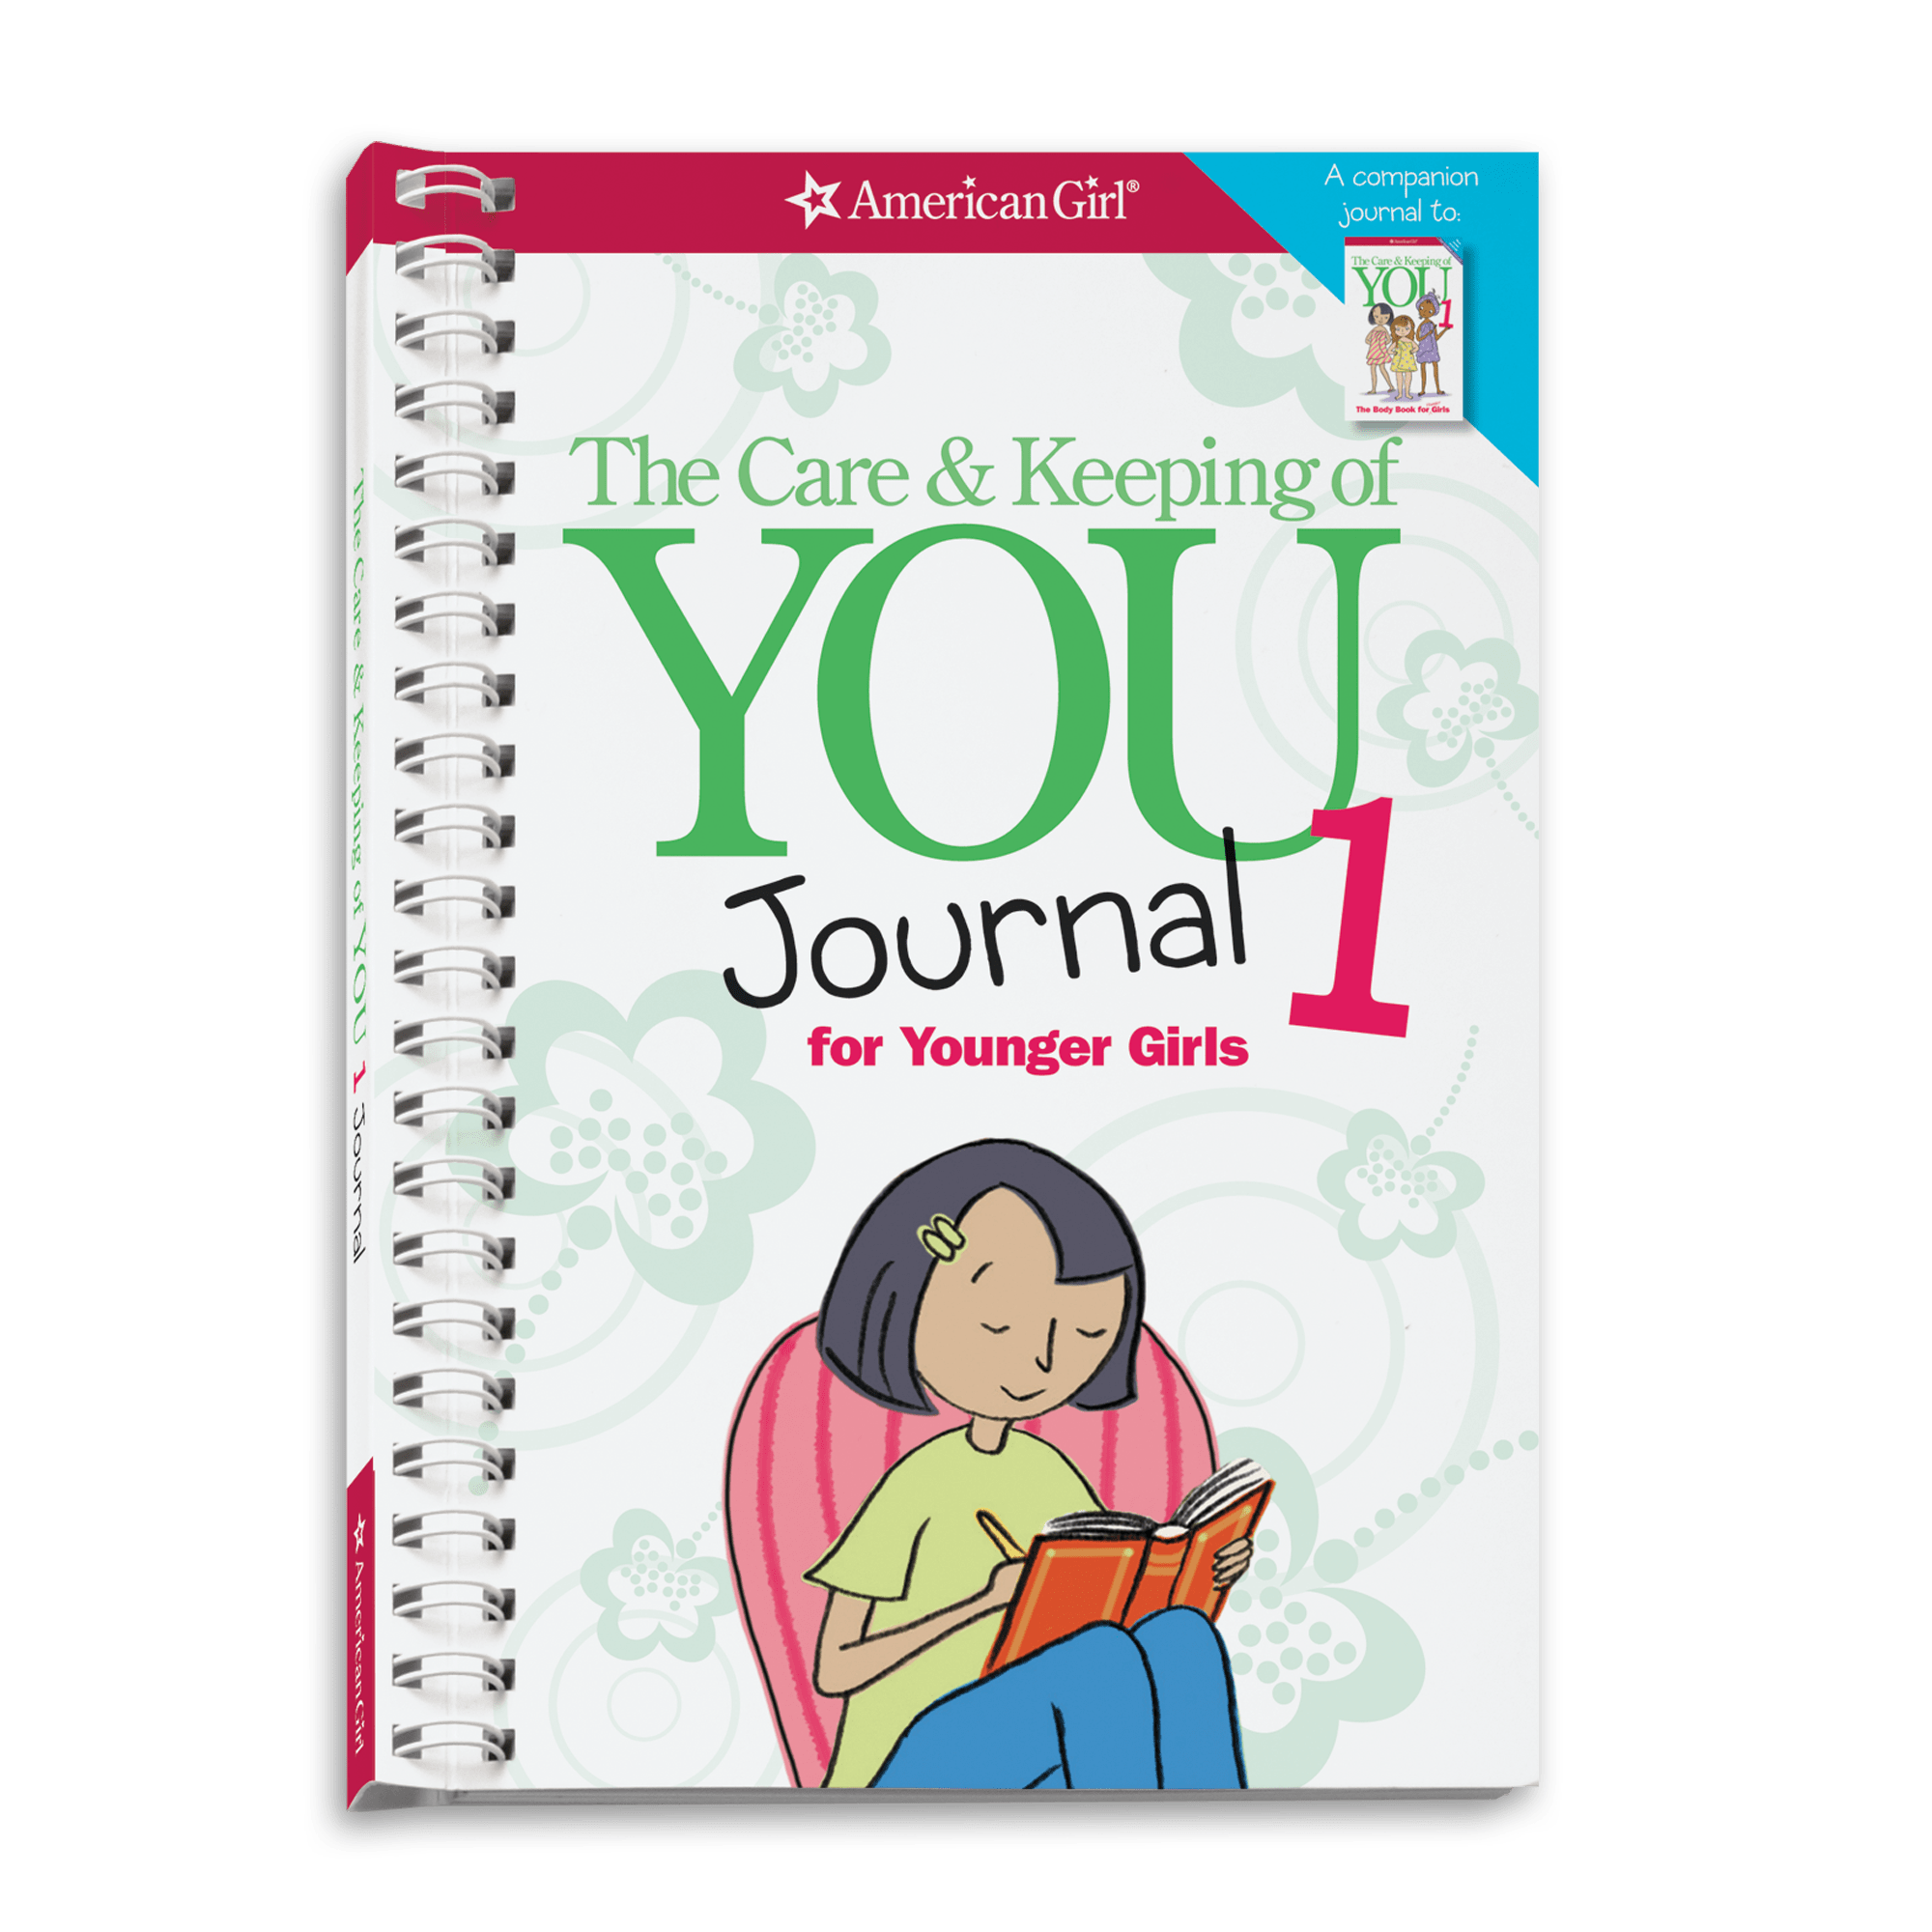 The Care & Keeping of You 1 Journal